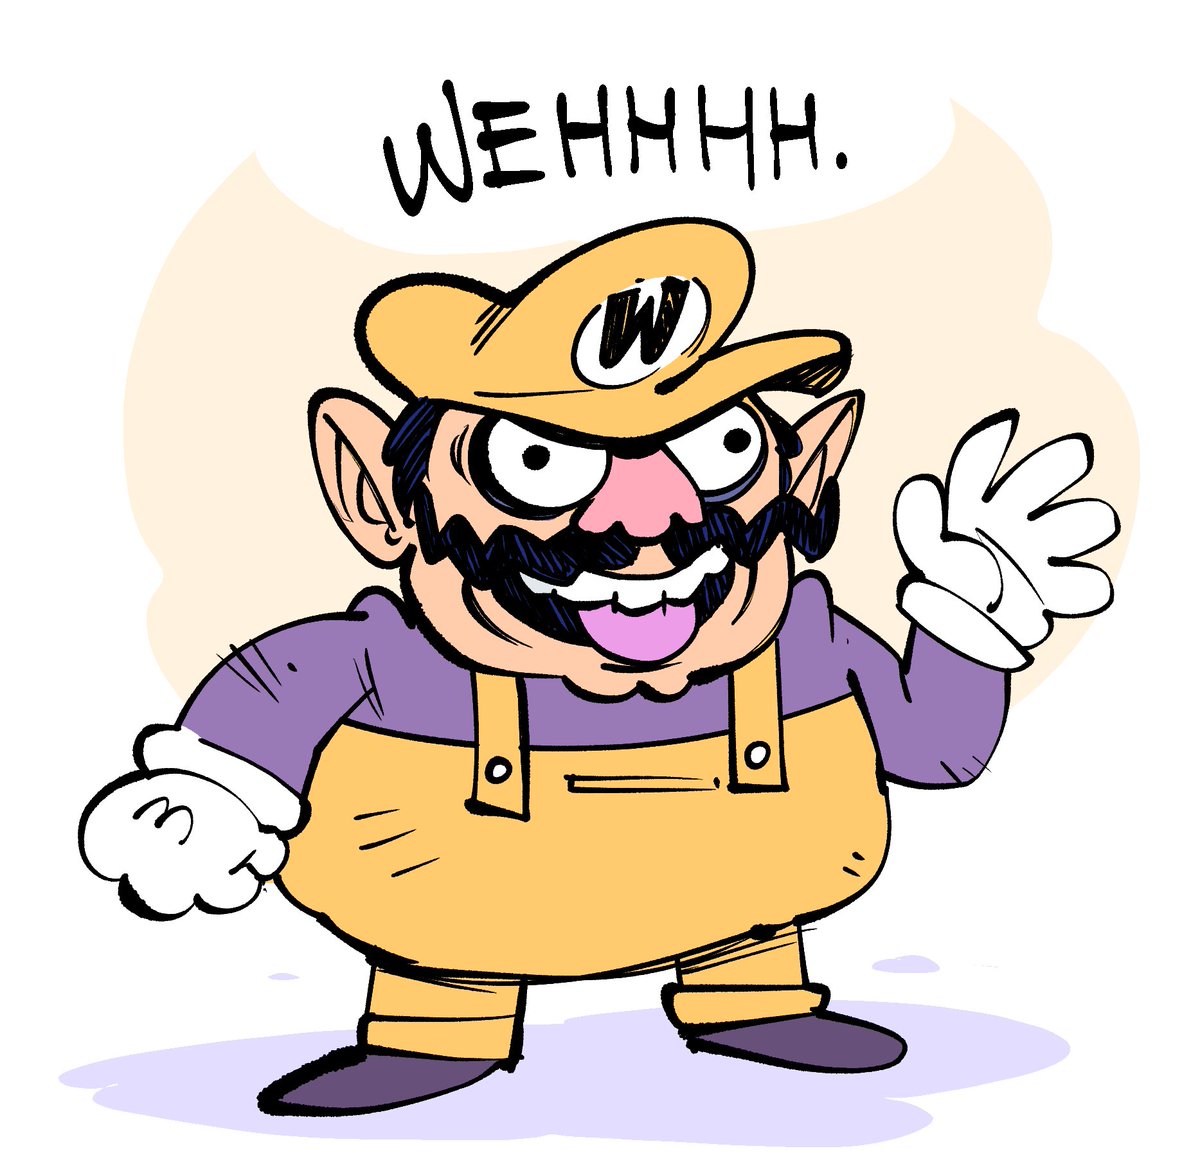 I regret to inform you that today is the beginning of #Warioctober, where everyone, be they just or wicked, must honor the terrible creature Wario. Here is Classic Wario. May we be forgiven for what we must do.